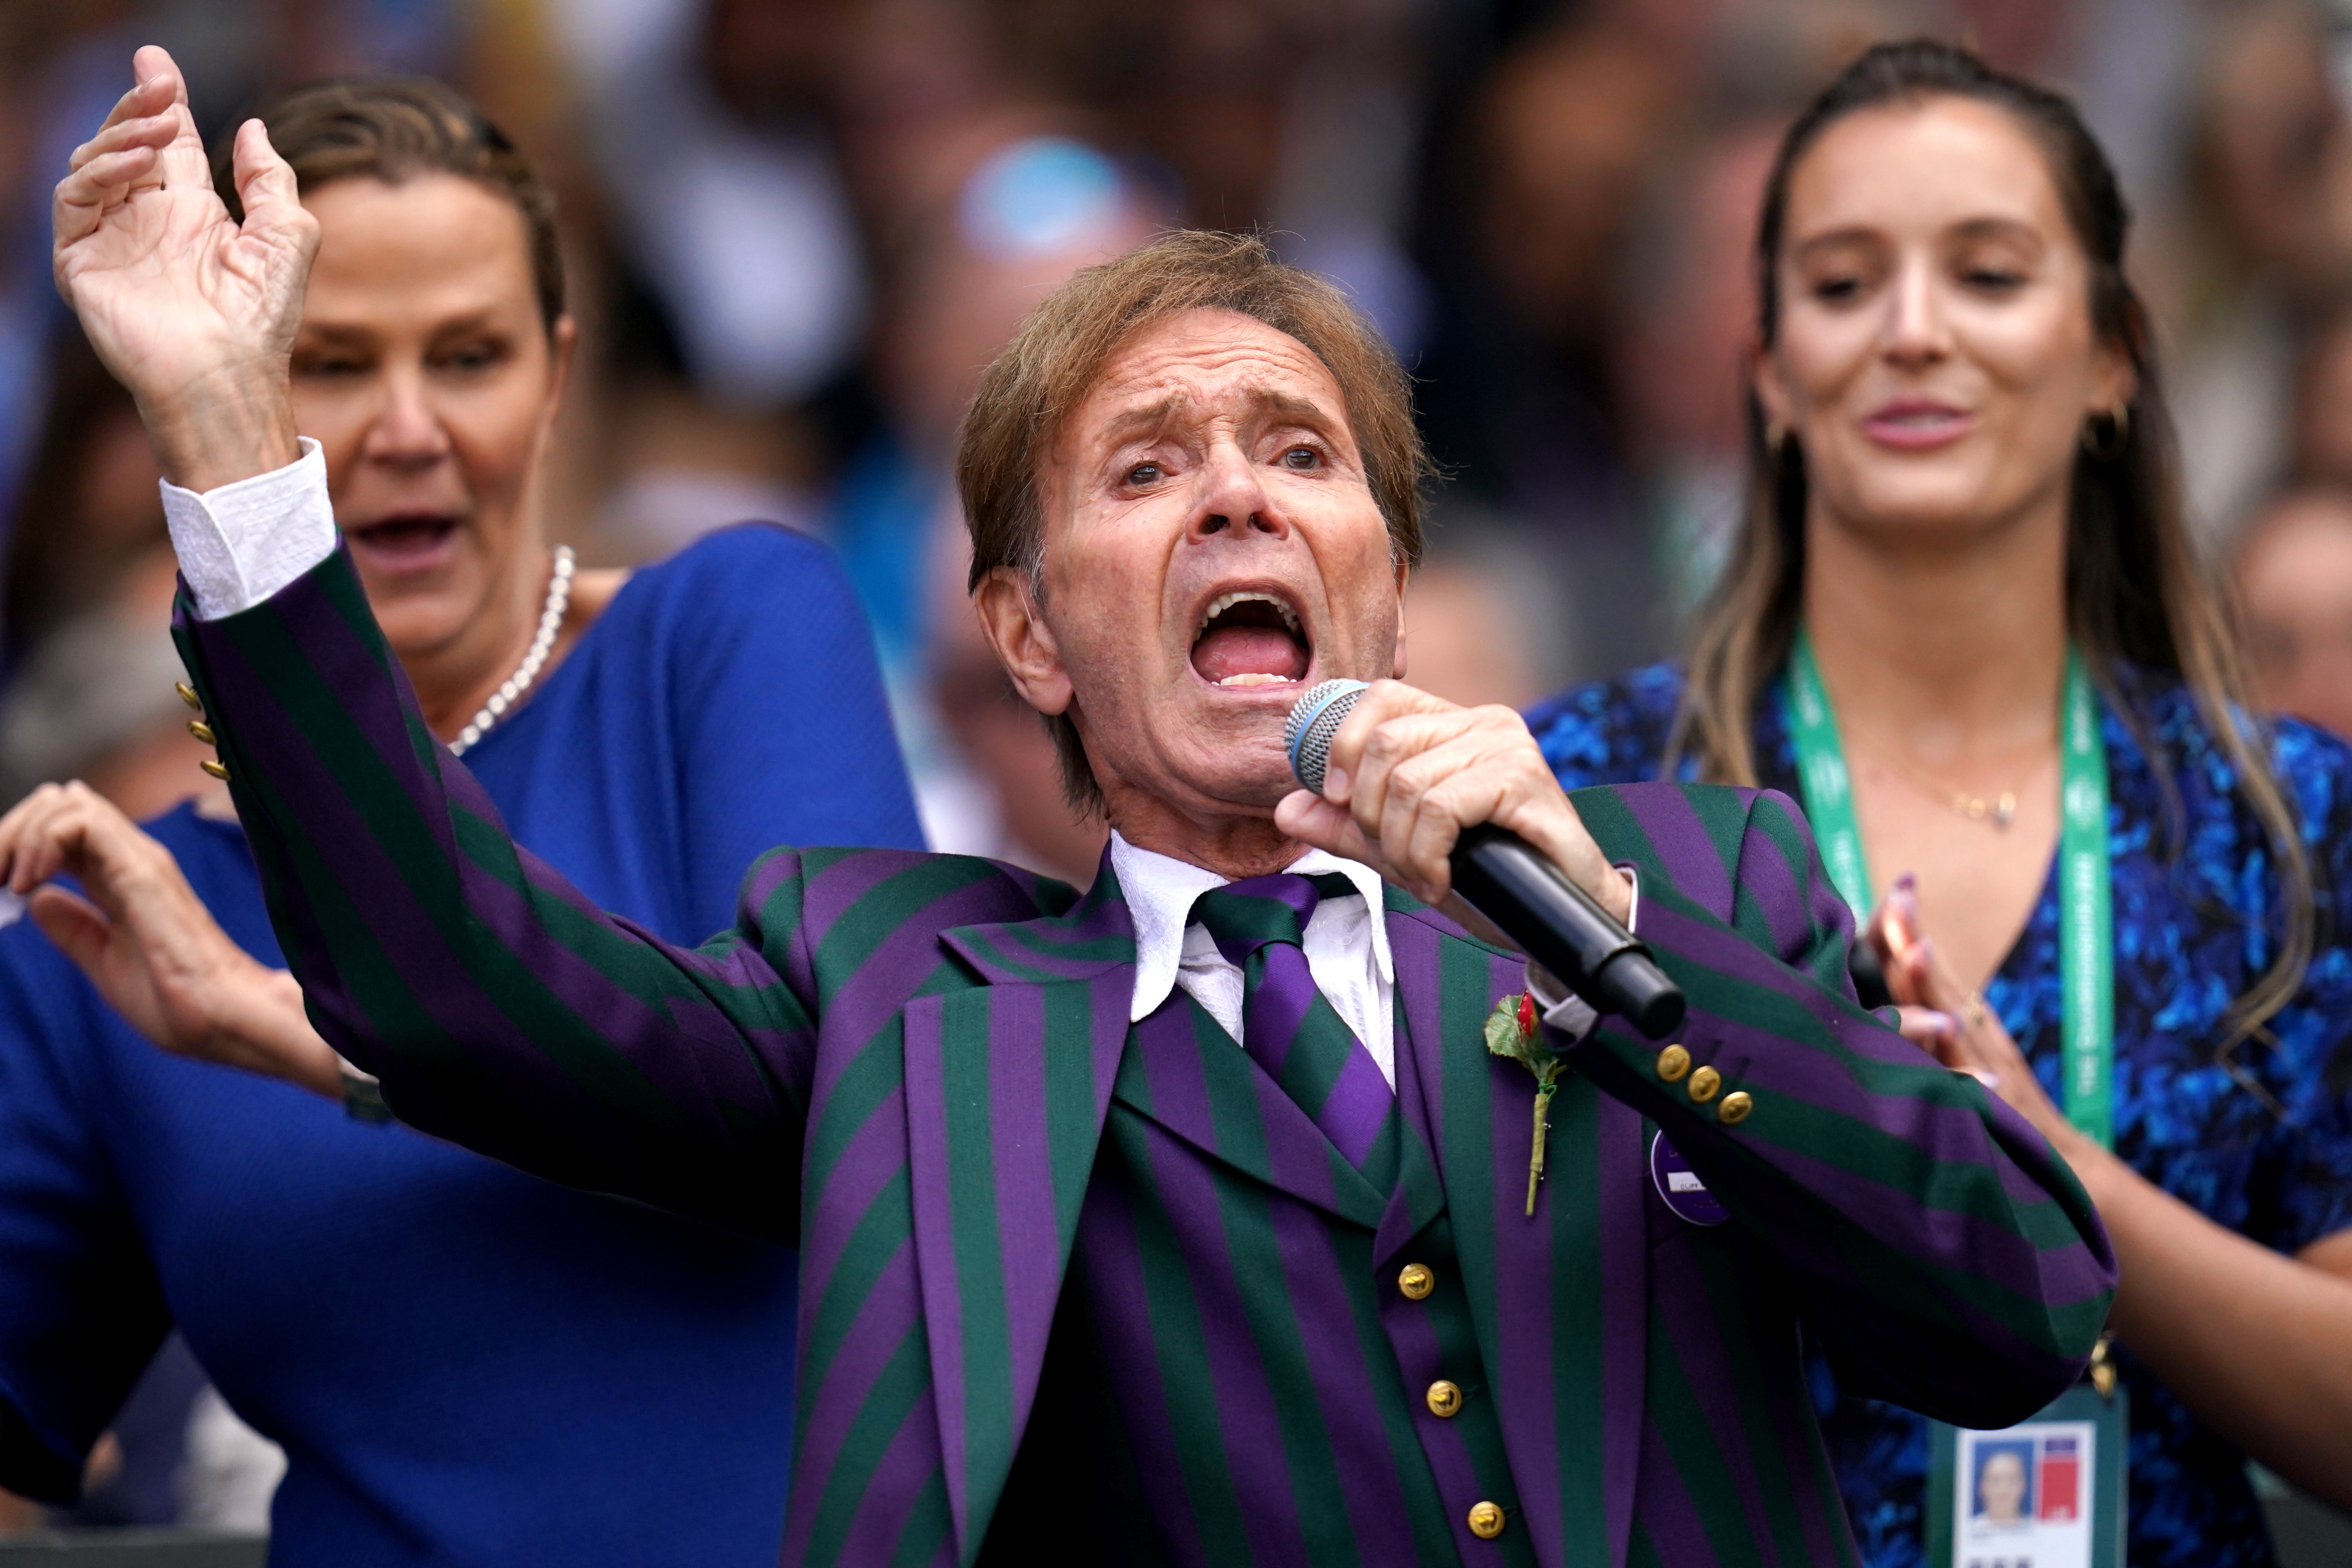 Sir Cliff Richard with backing singers Pam Shriver (left) and Laura Robson (John Walton/PA)